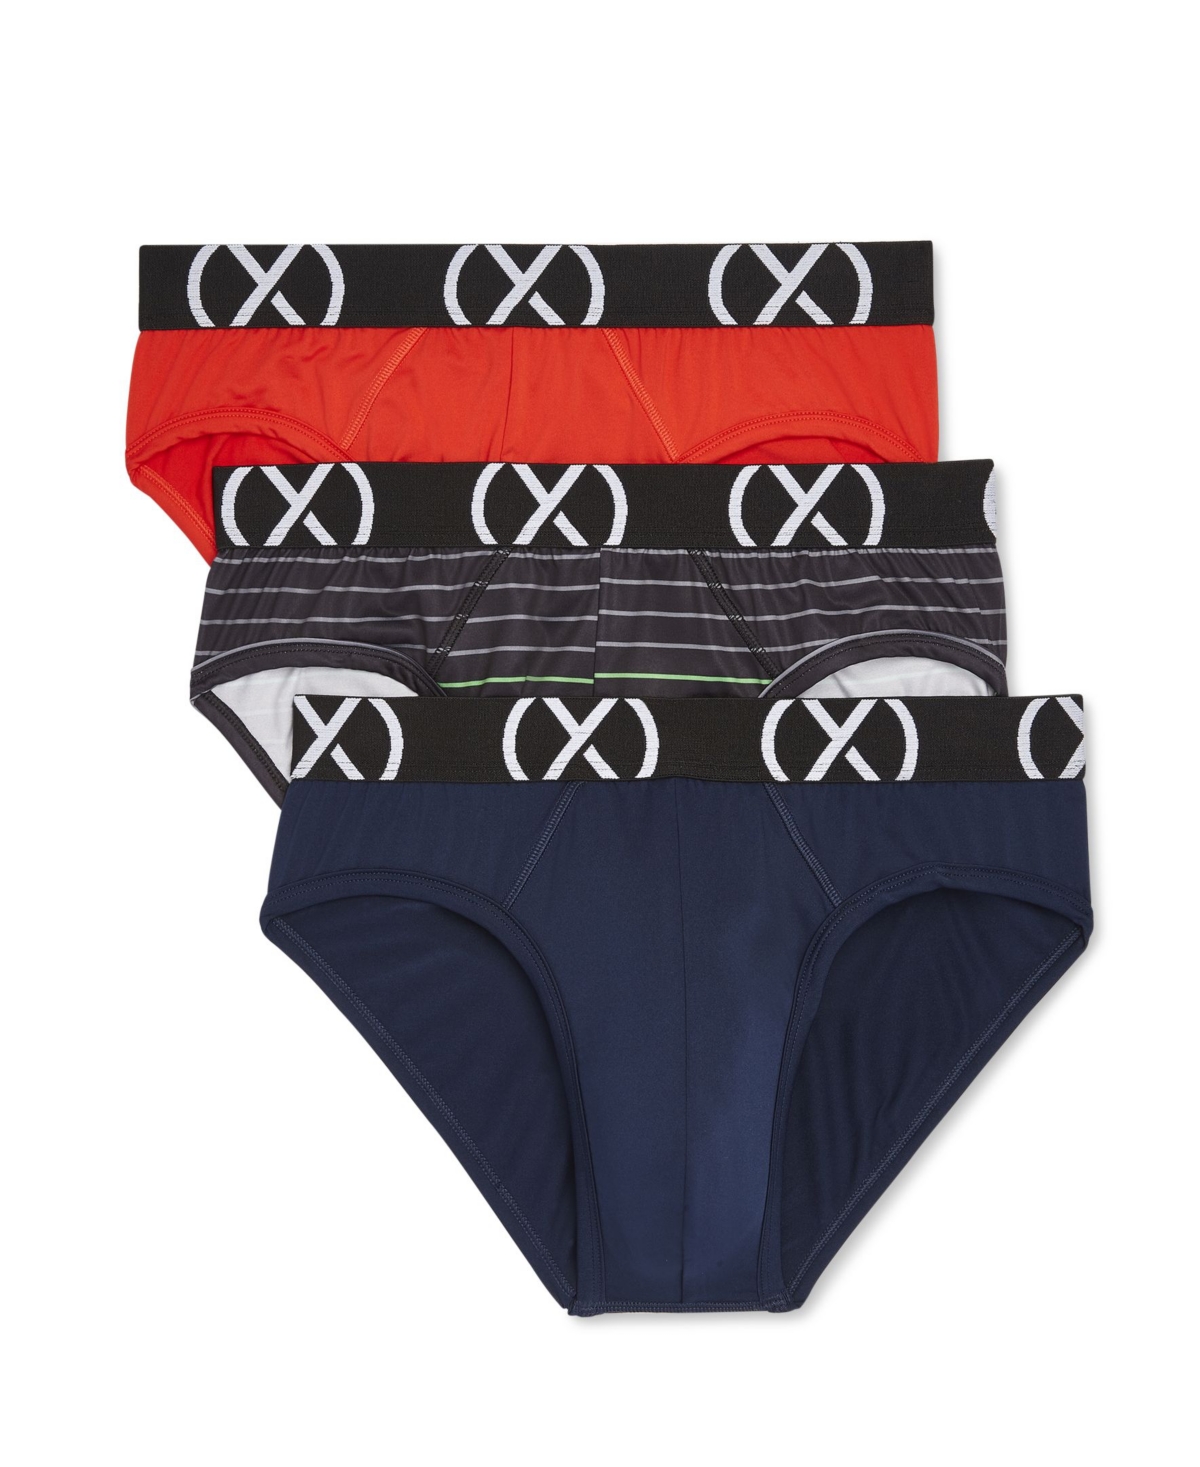 2(x)ist Men's Micro Sport No Show Performance Ready Brief, Pack Of 3 In Fiery Red,stripe,navy